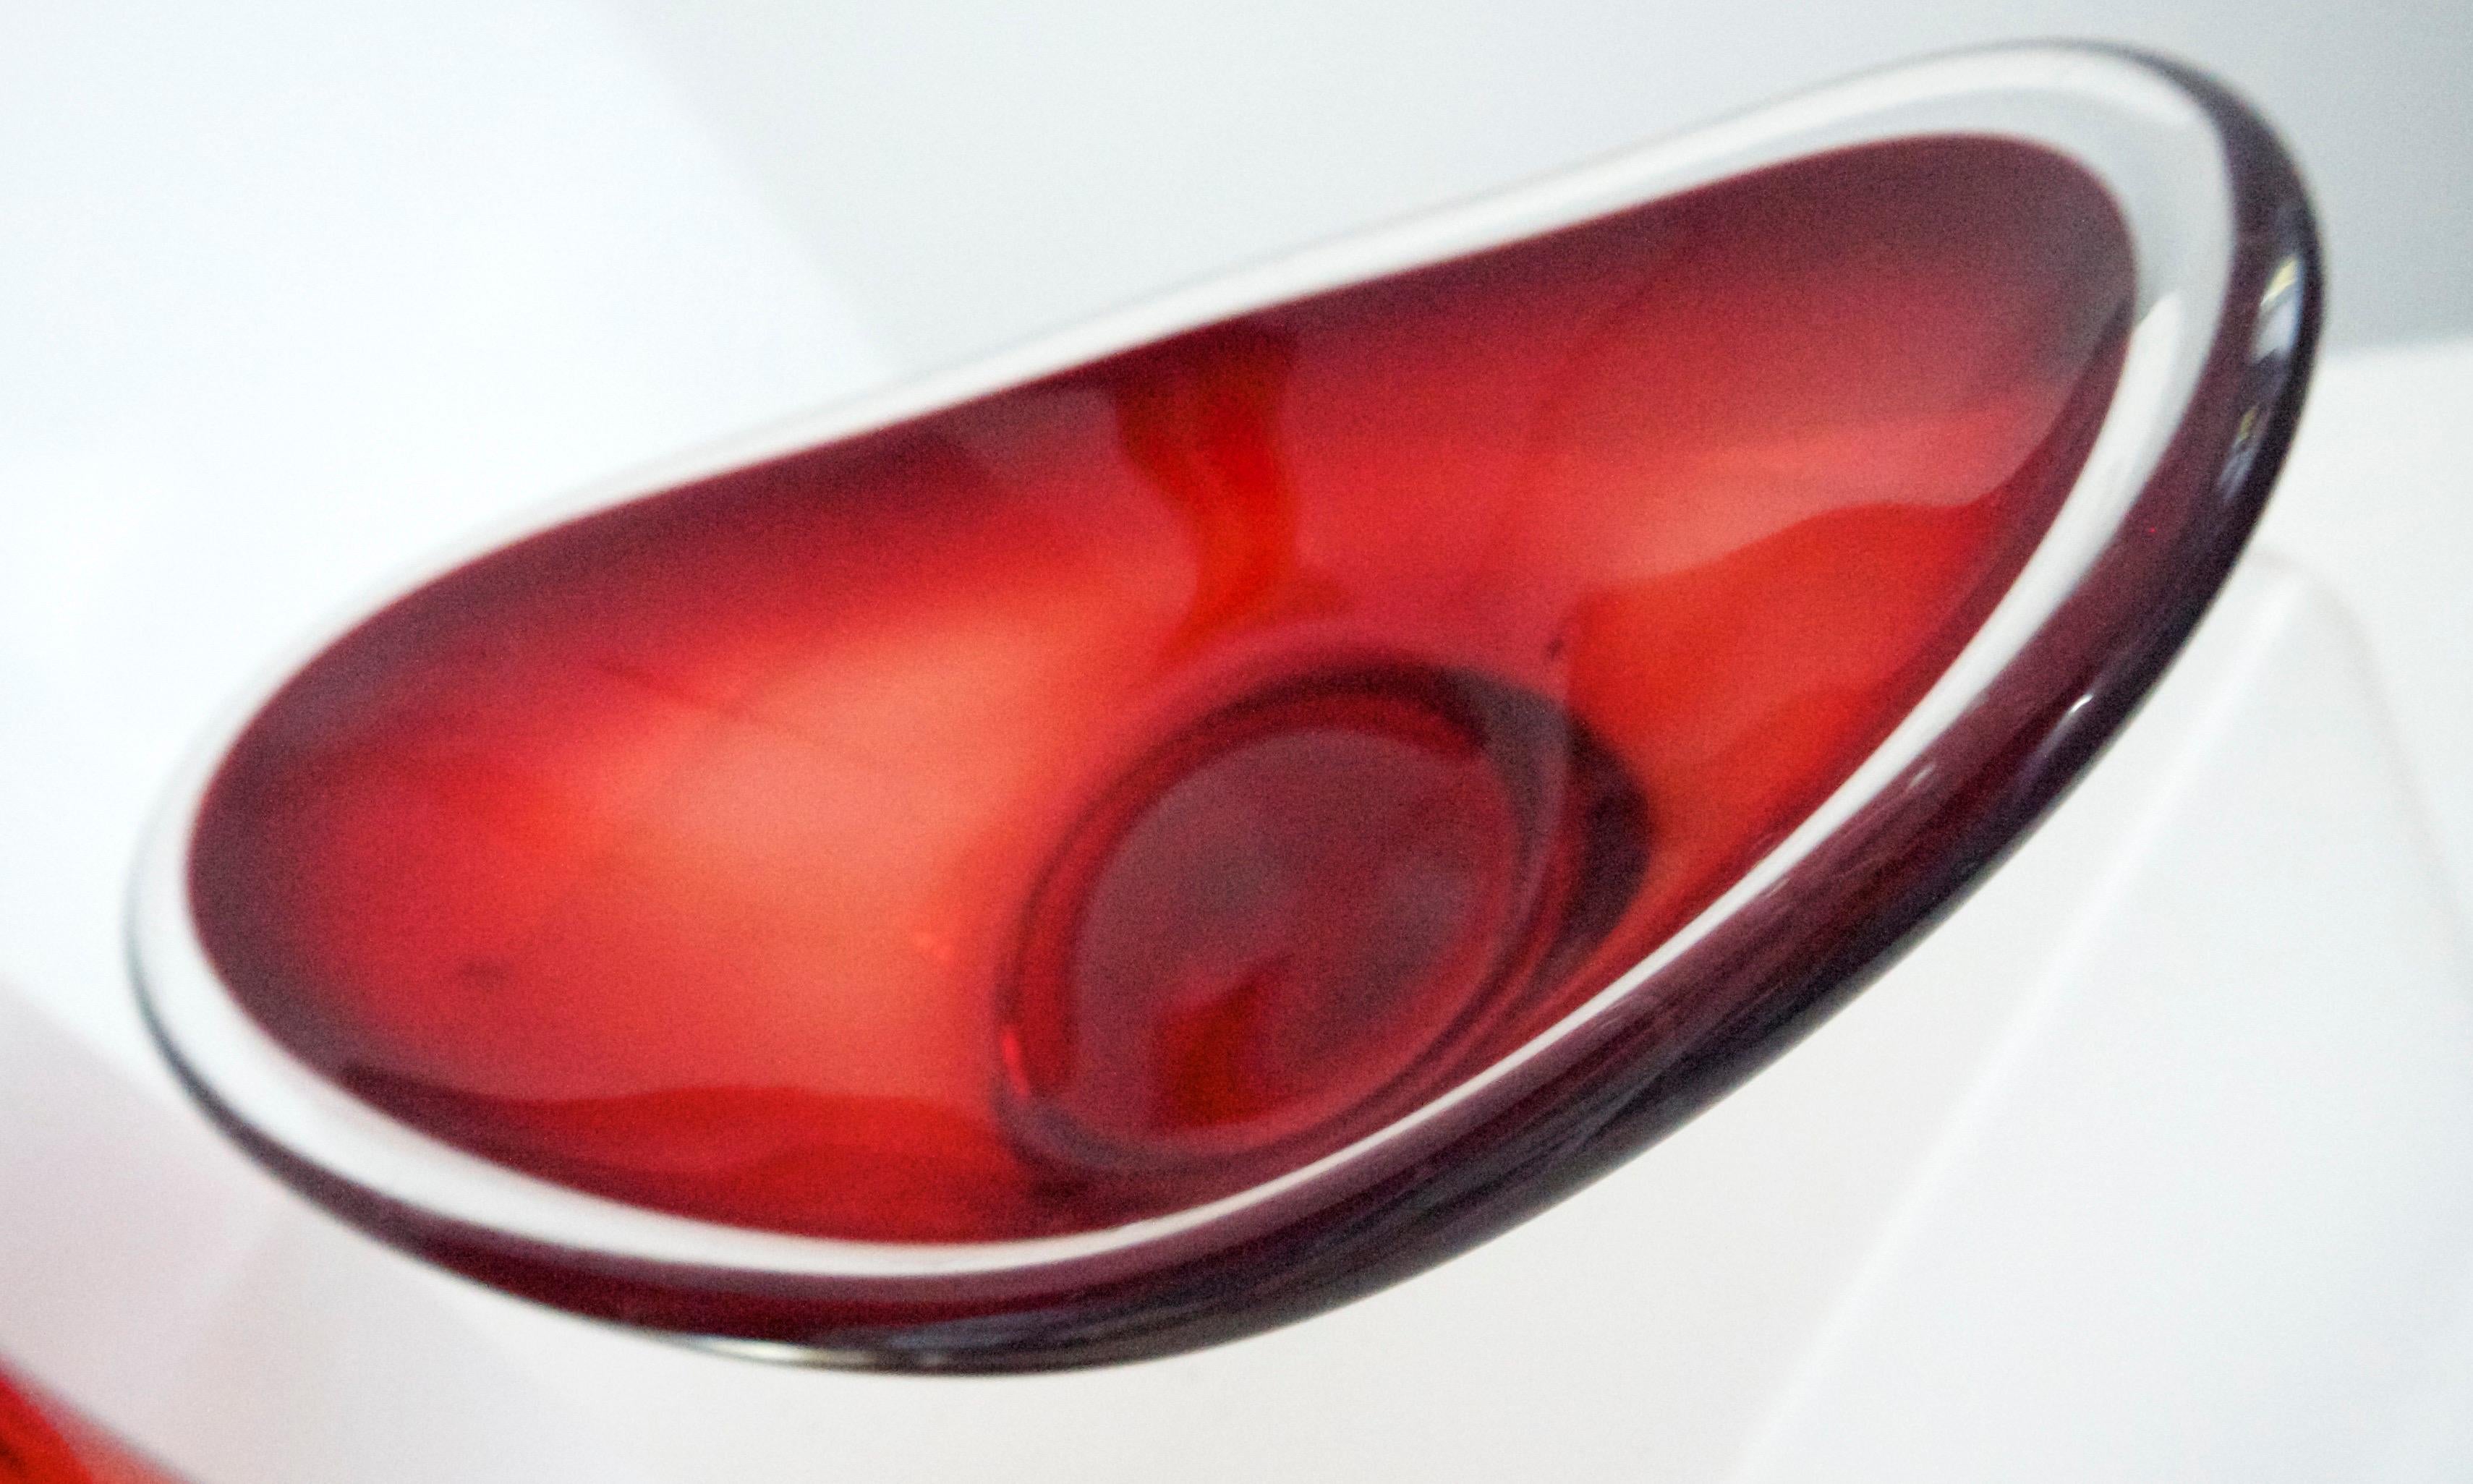 Modernist Murano Sommerso vase by Flavio Poli with dish
These pieces graduates from orange through to a deeper red at the tip which is reflected in the dish
Dish measures 21 cm in length and 13 cm in diameter designer Flavio Poli
Manufacturer